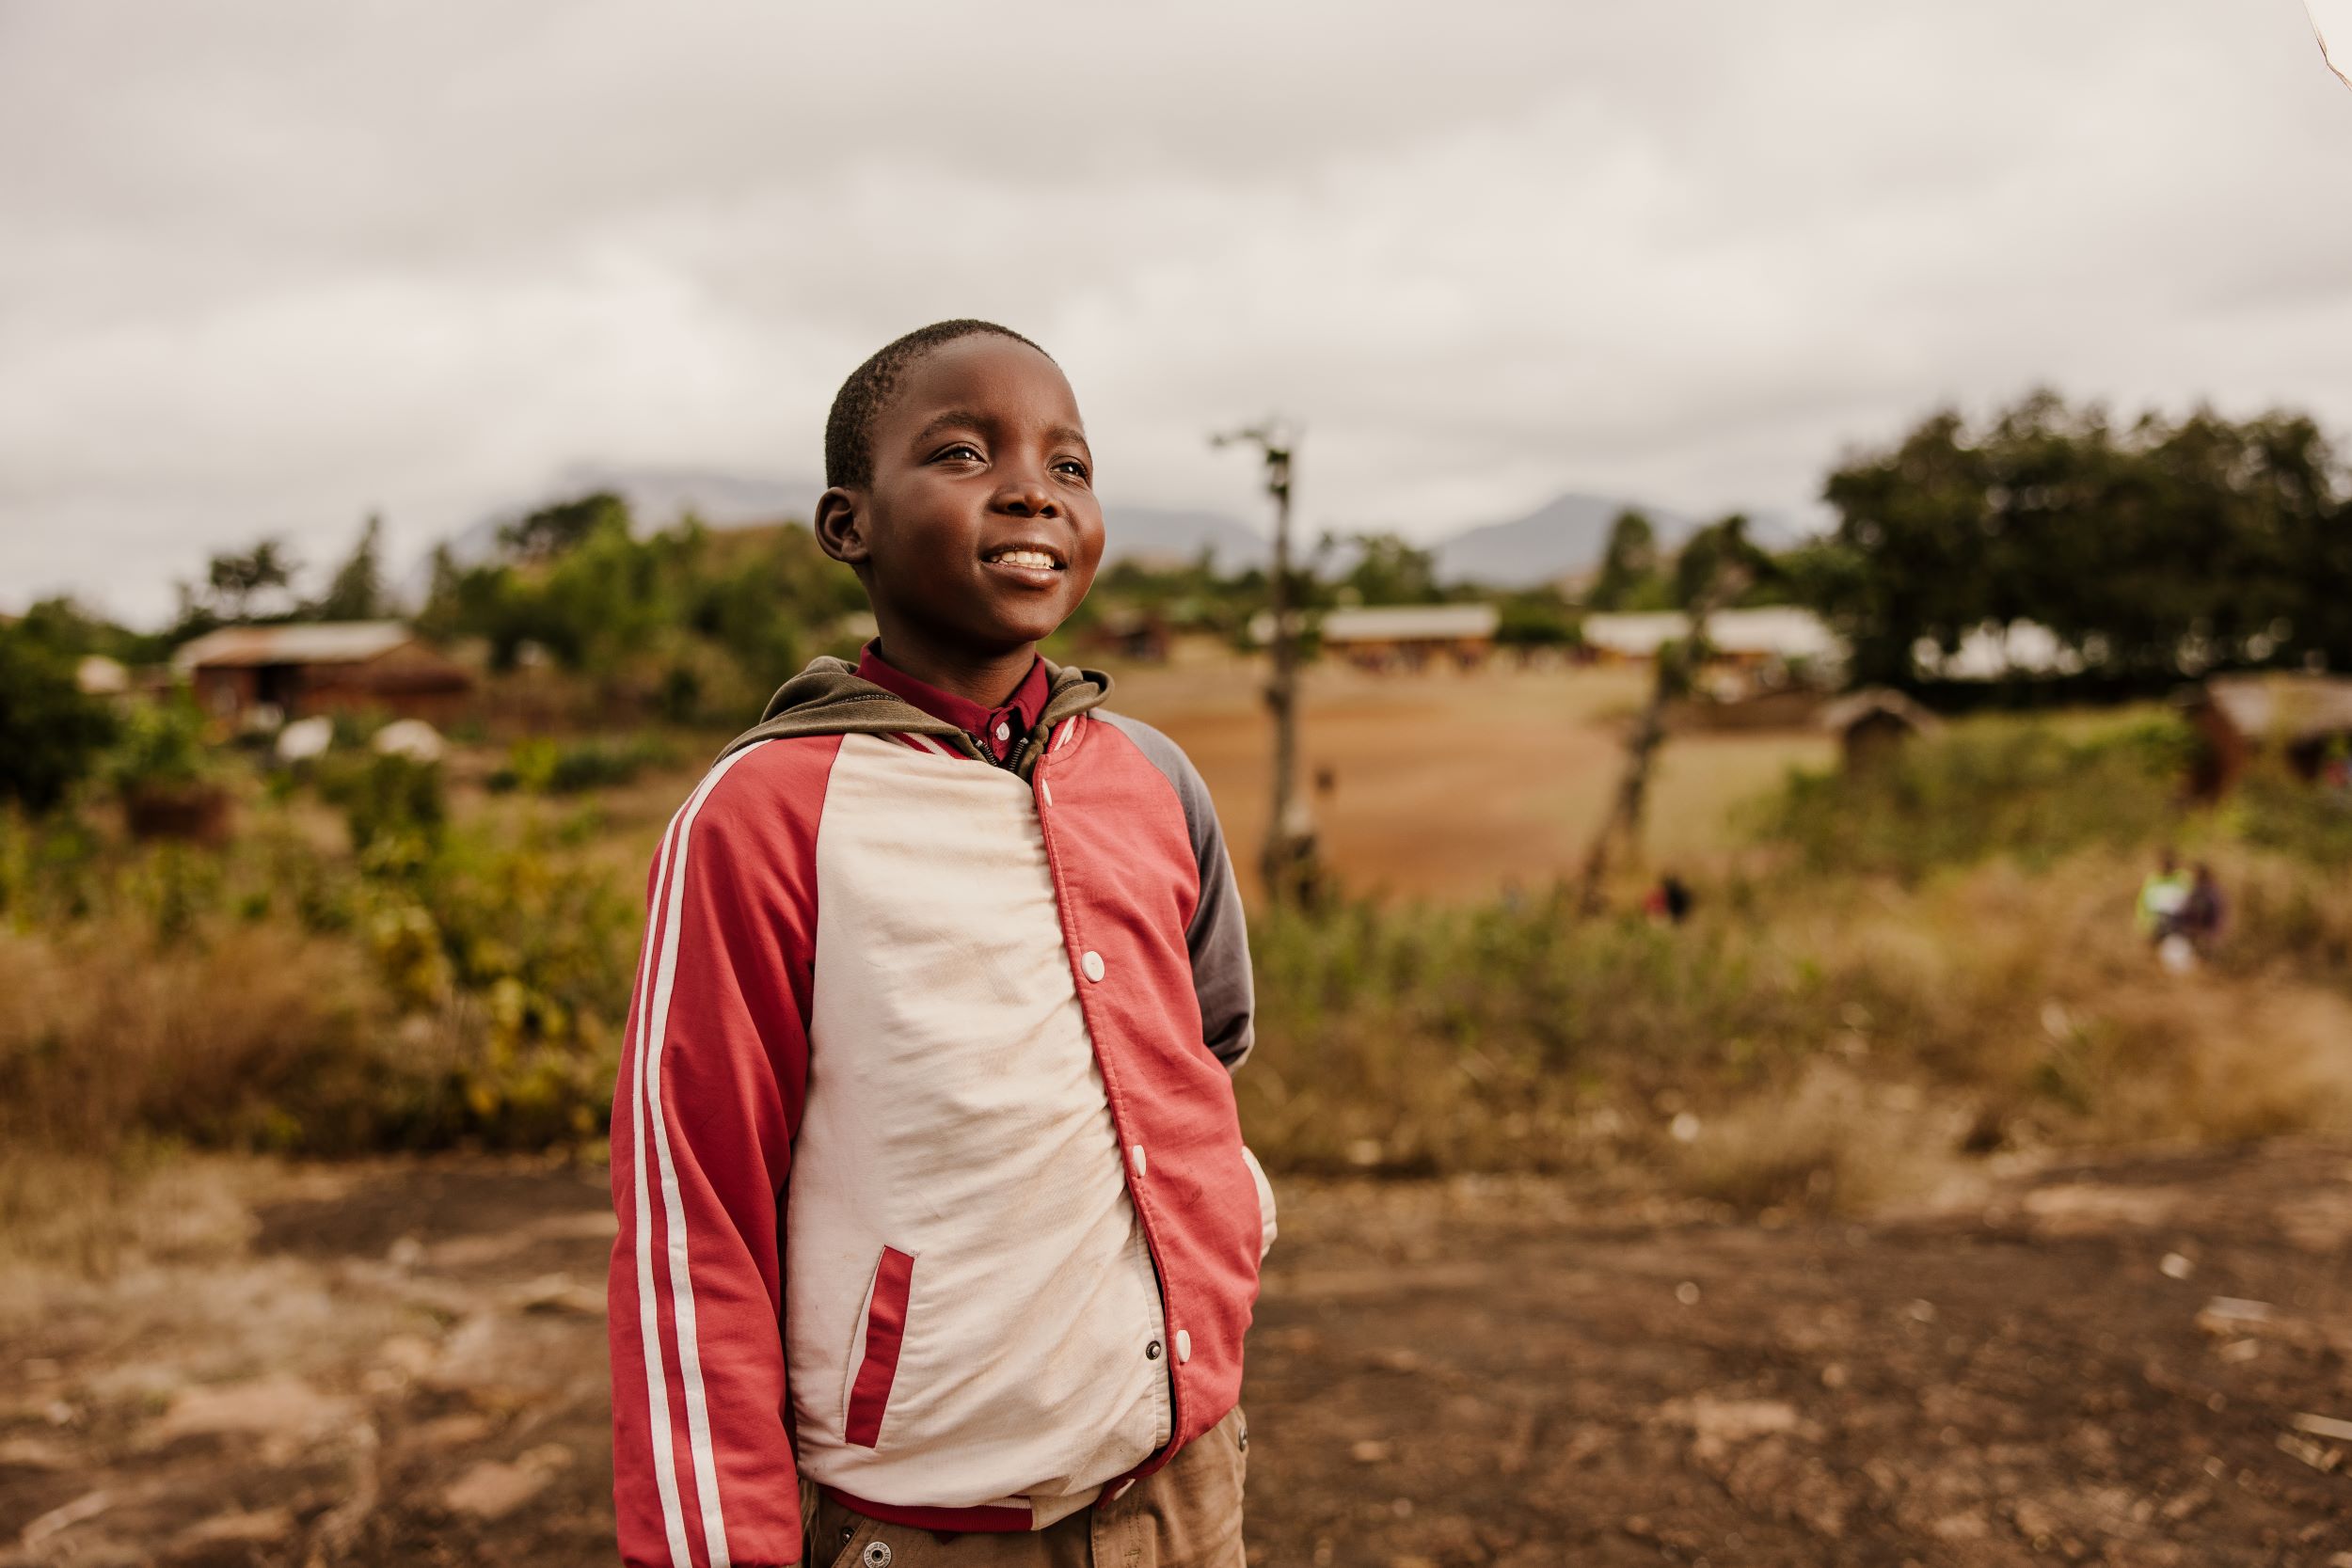 Boy from Malawi smiling in red and white jacket